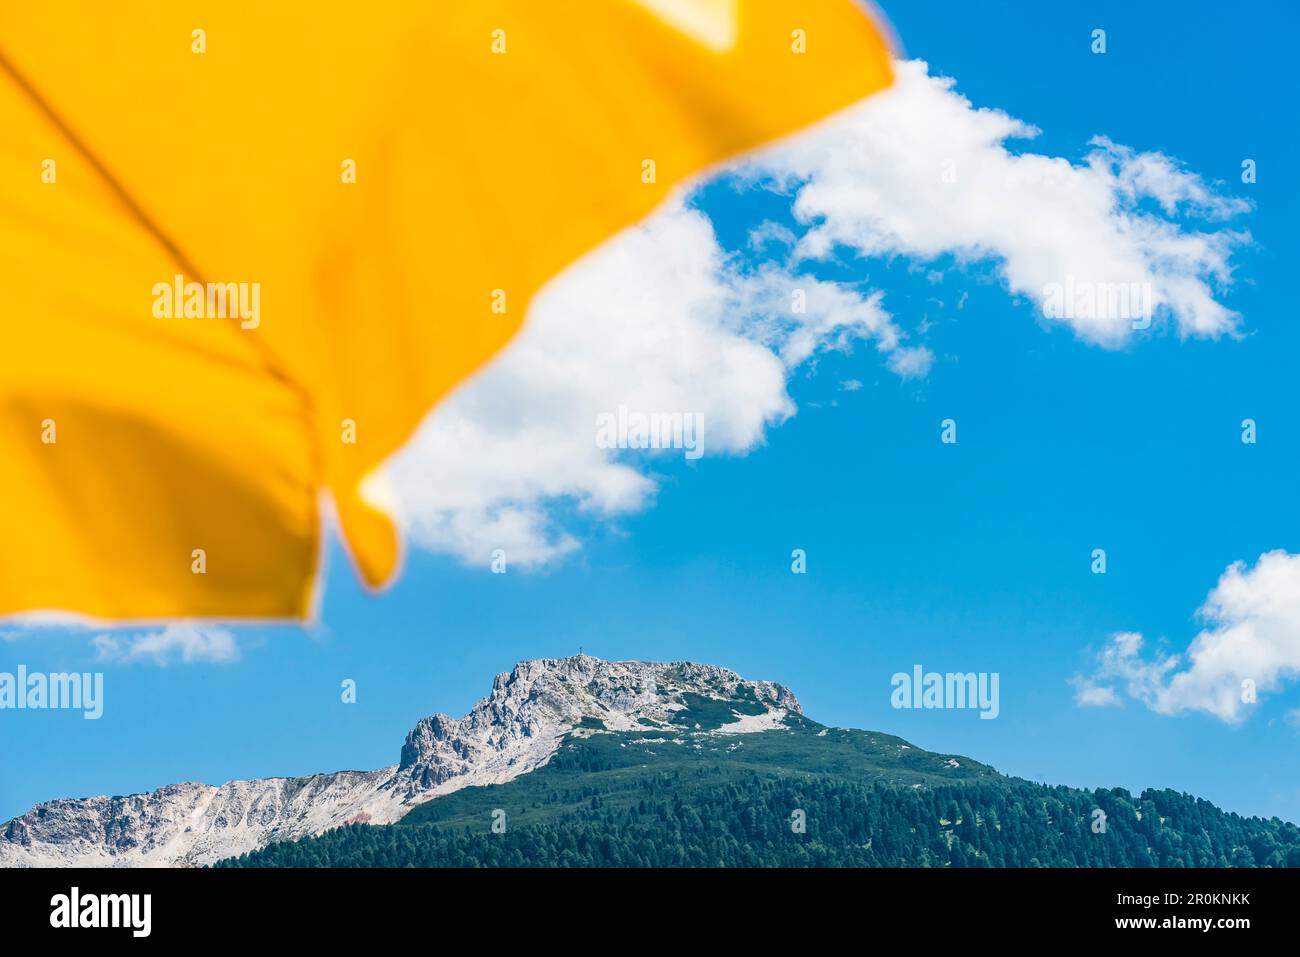 View past a yellow sunshade to the Weisshorn with the adjacent Bletterbach UNESCO World Heritage, Aldein, South Tyrol, Alto Adige, Italy Stock Photo